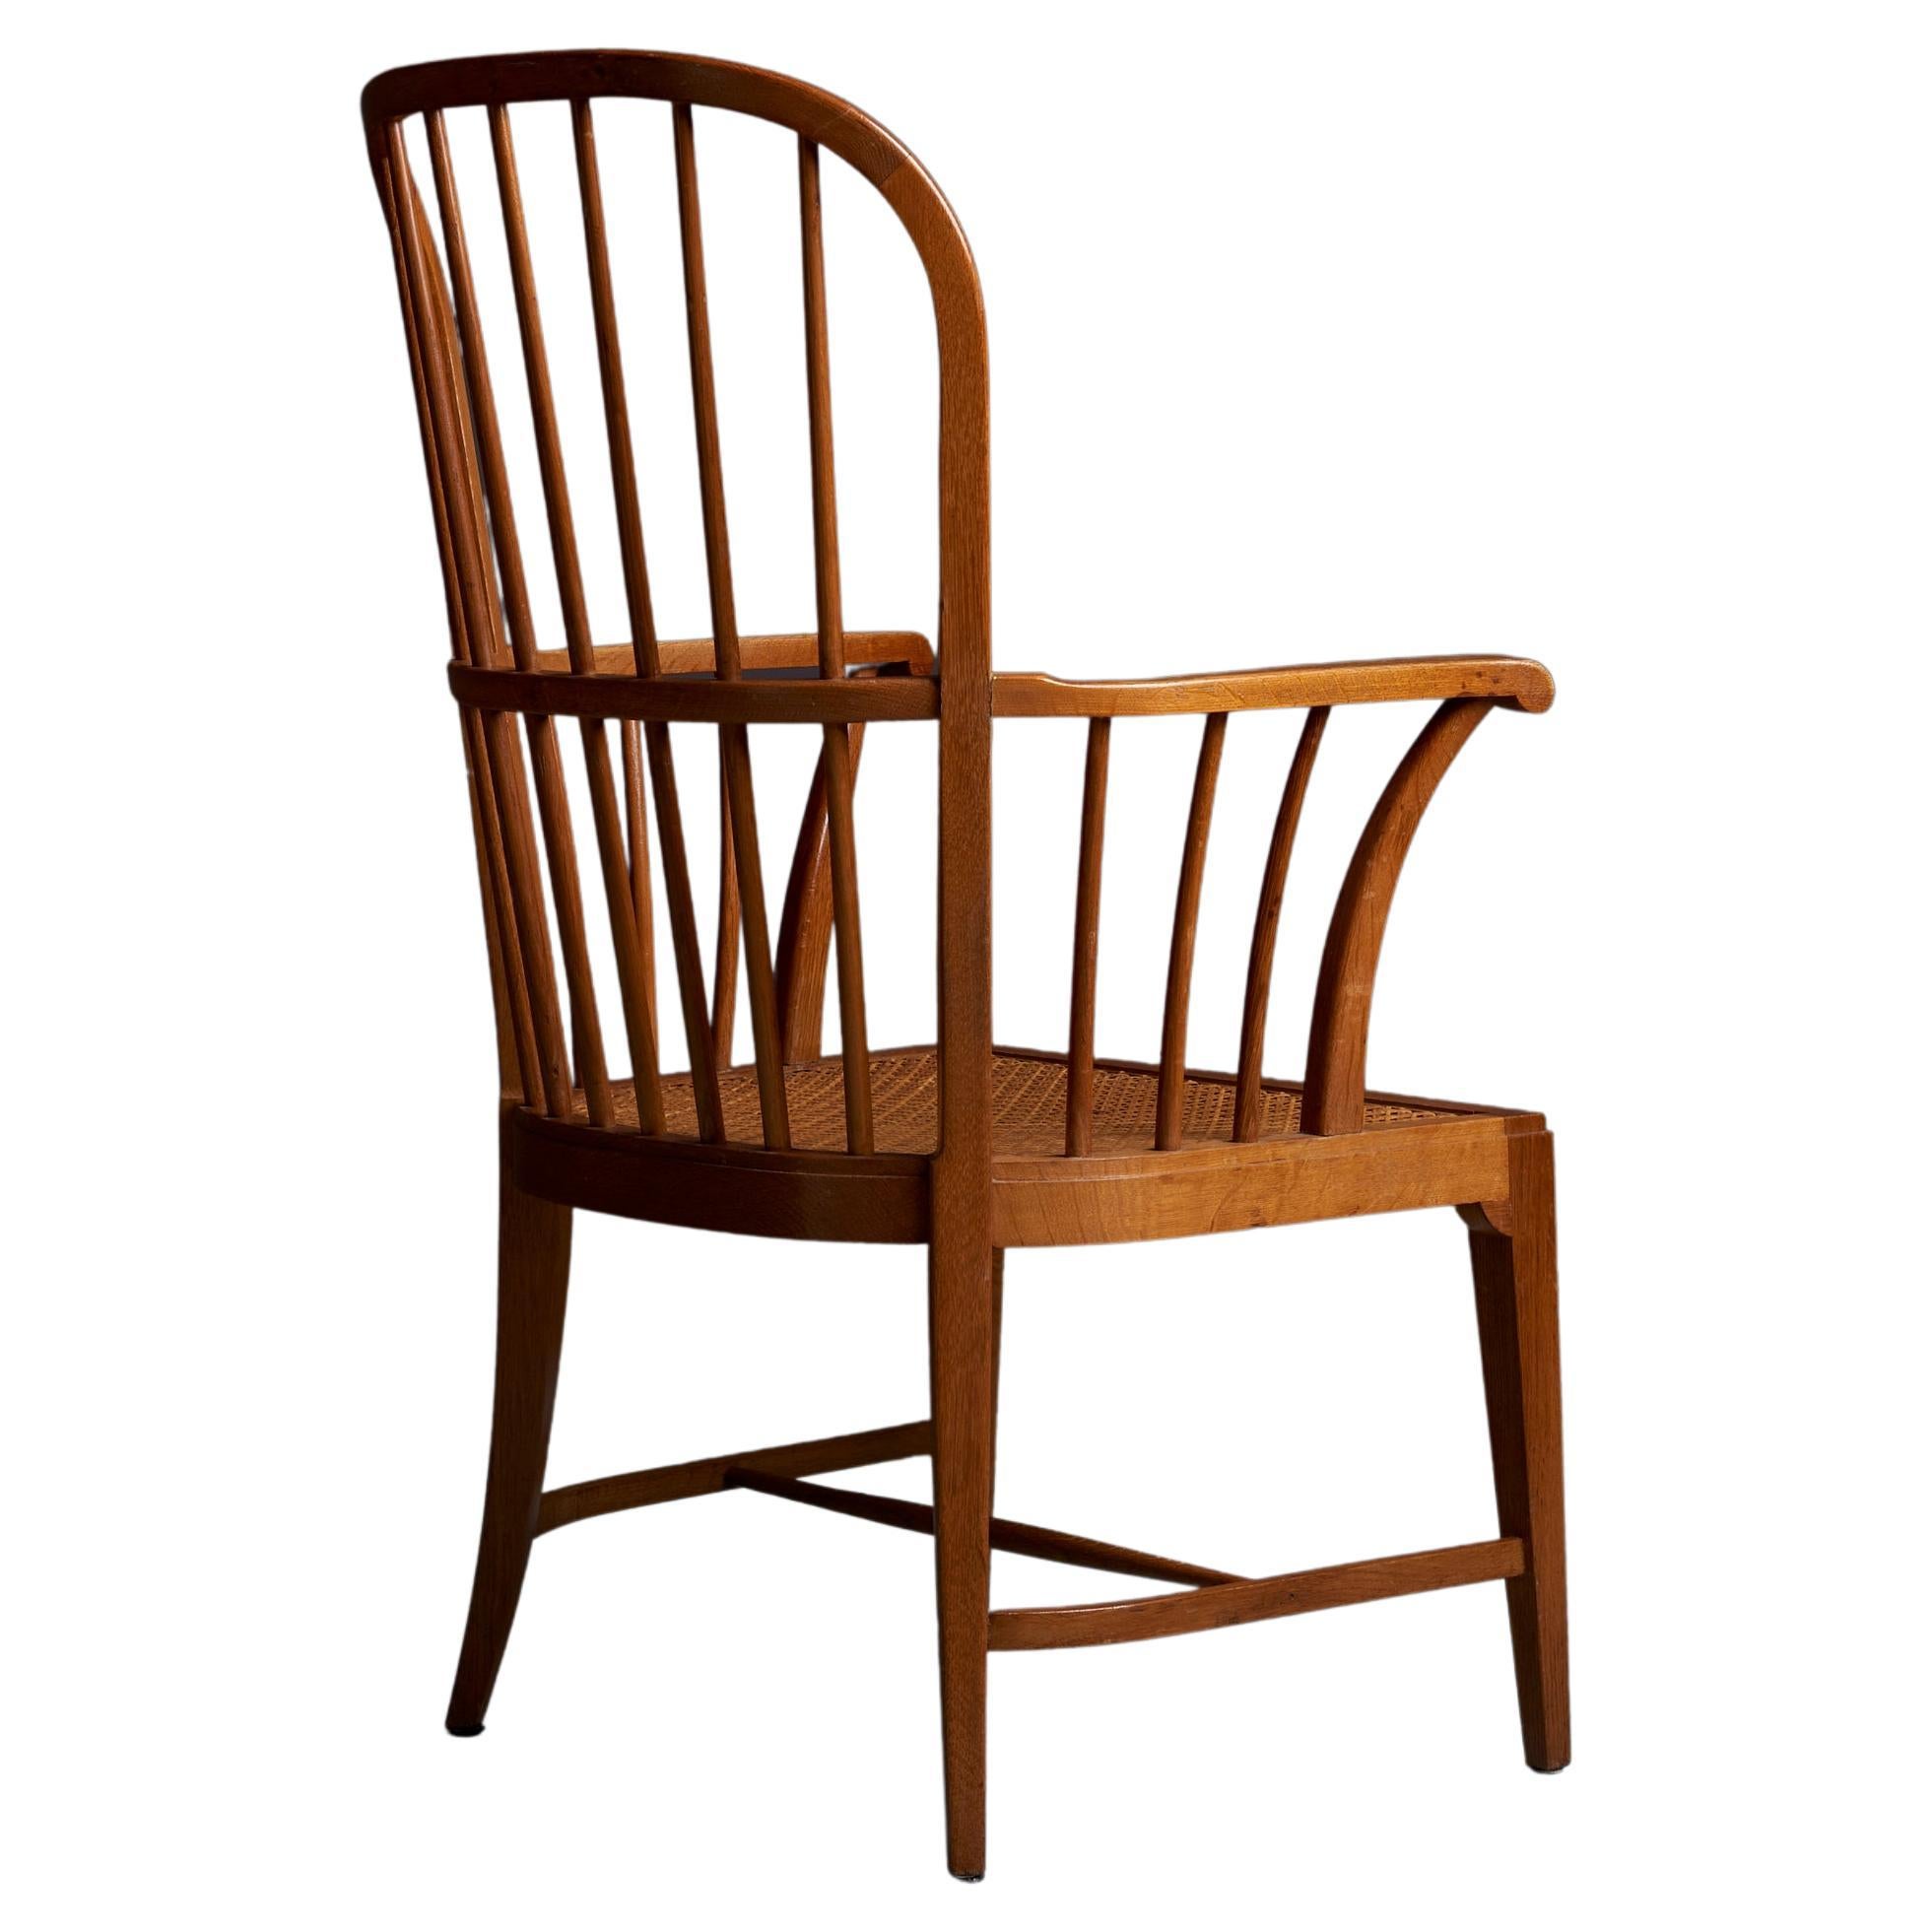 Mid-Century Modern Danish windsor chair in oak in excellent condition. The webbed seat is also perfect.

